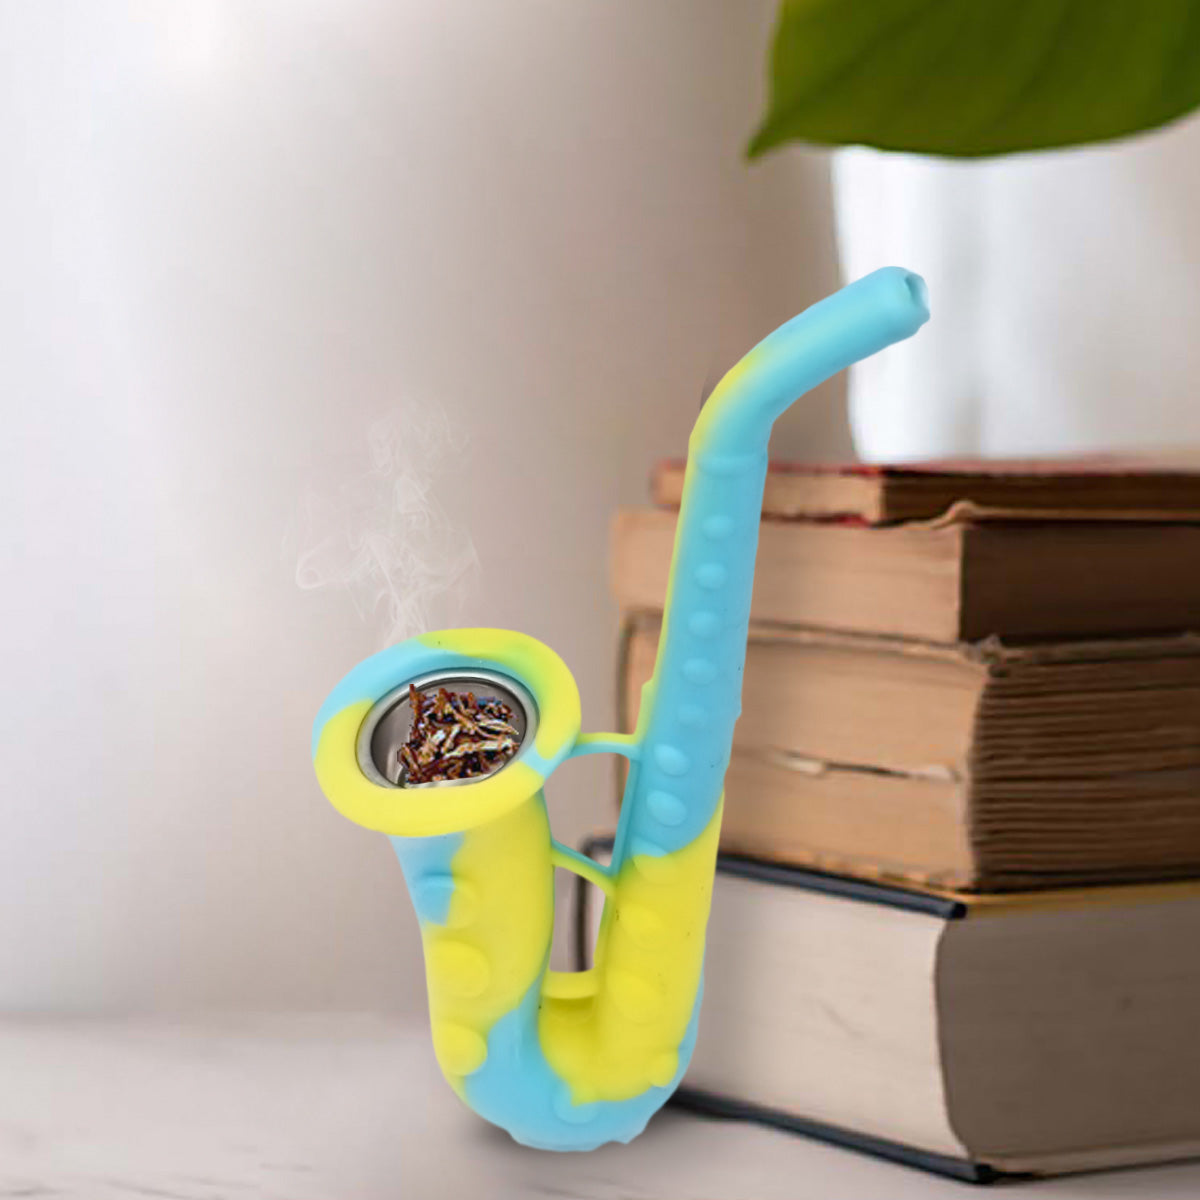 Silicone Unbreakable Smoking Pipe, Tobacco Pipes with Steel Bowl, Blue Yellow